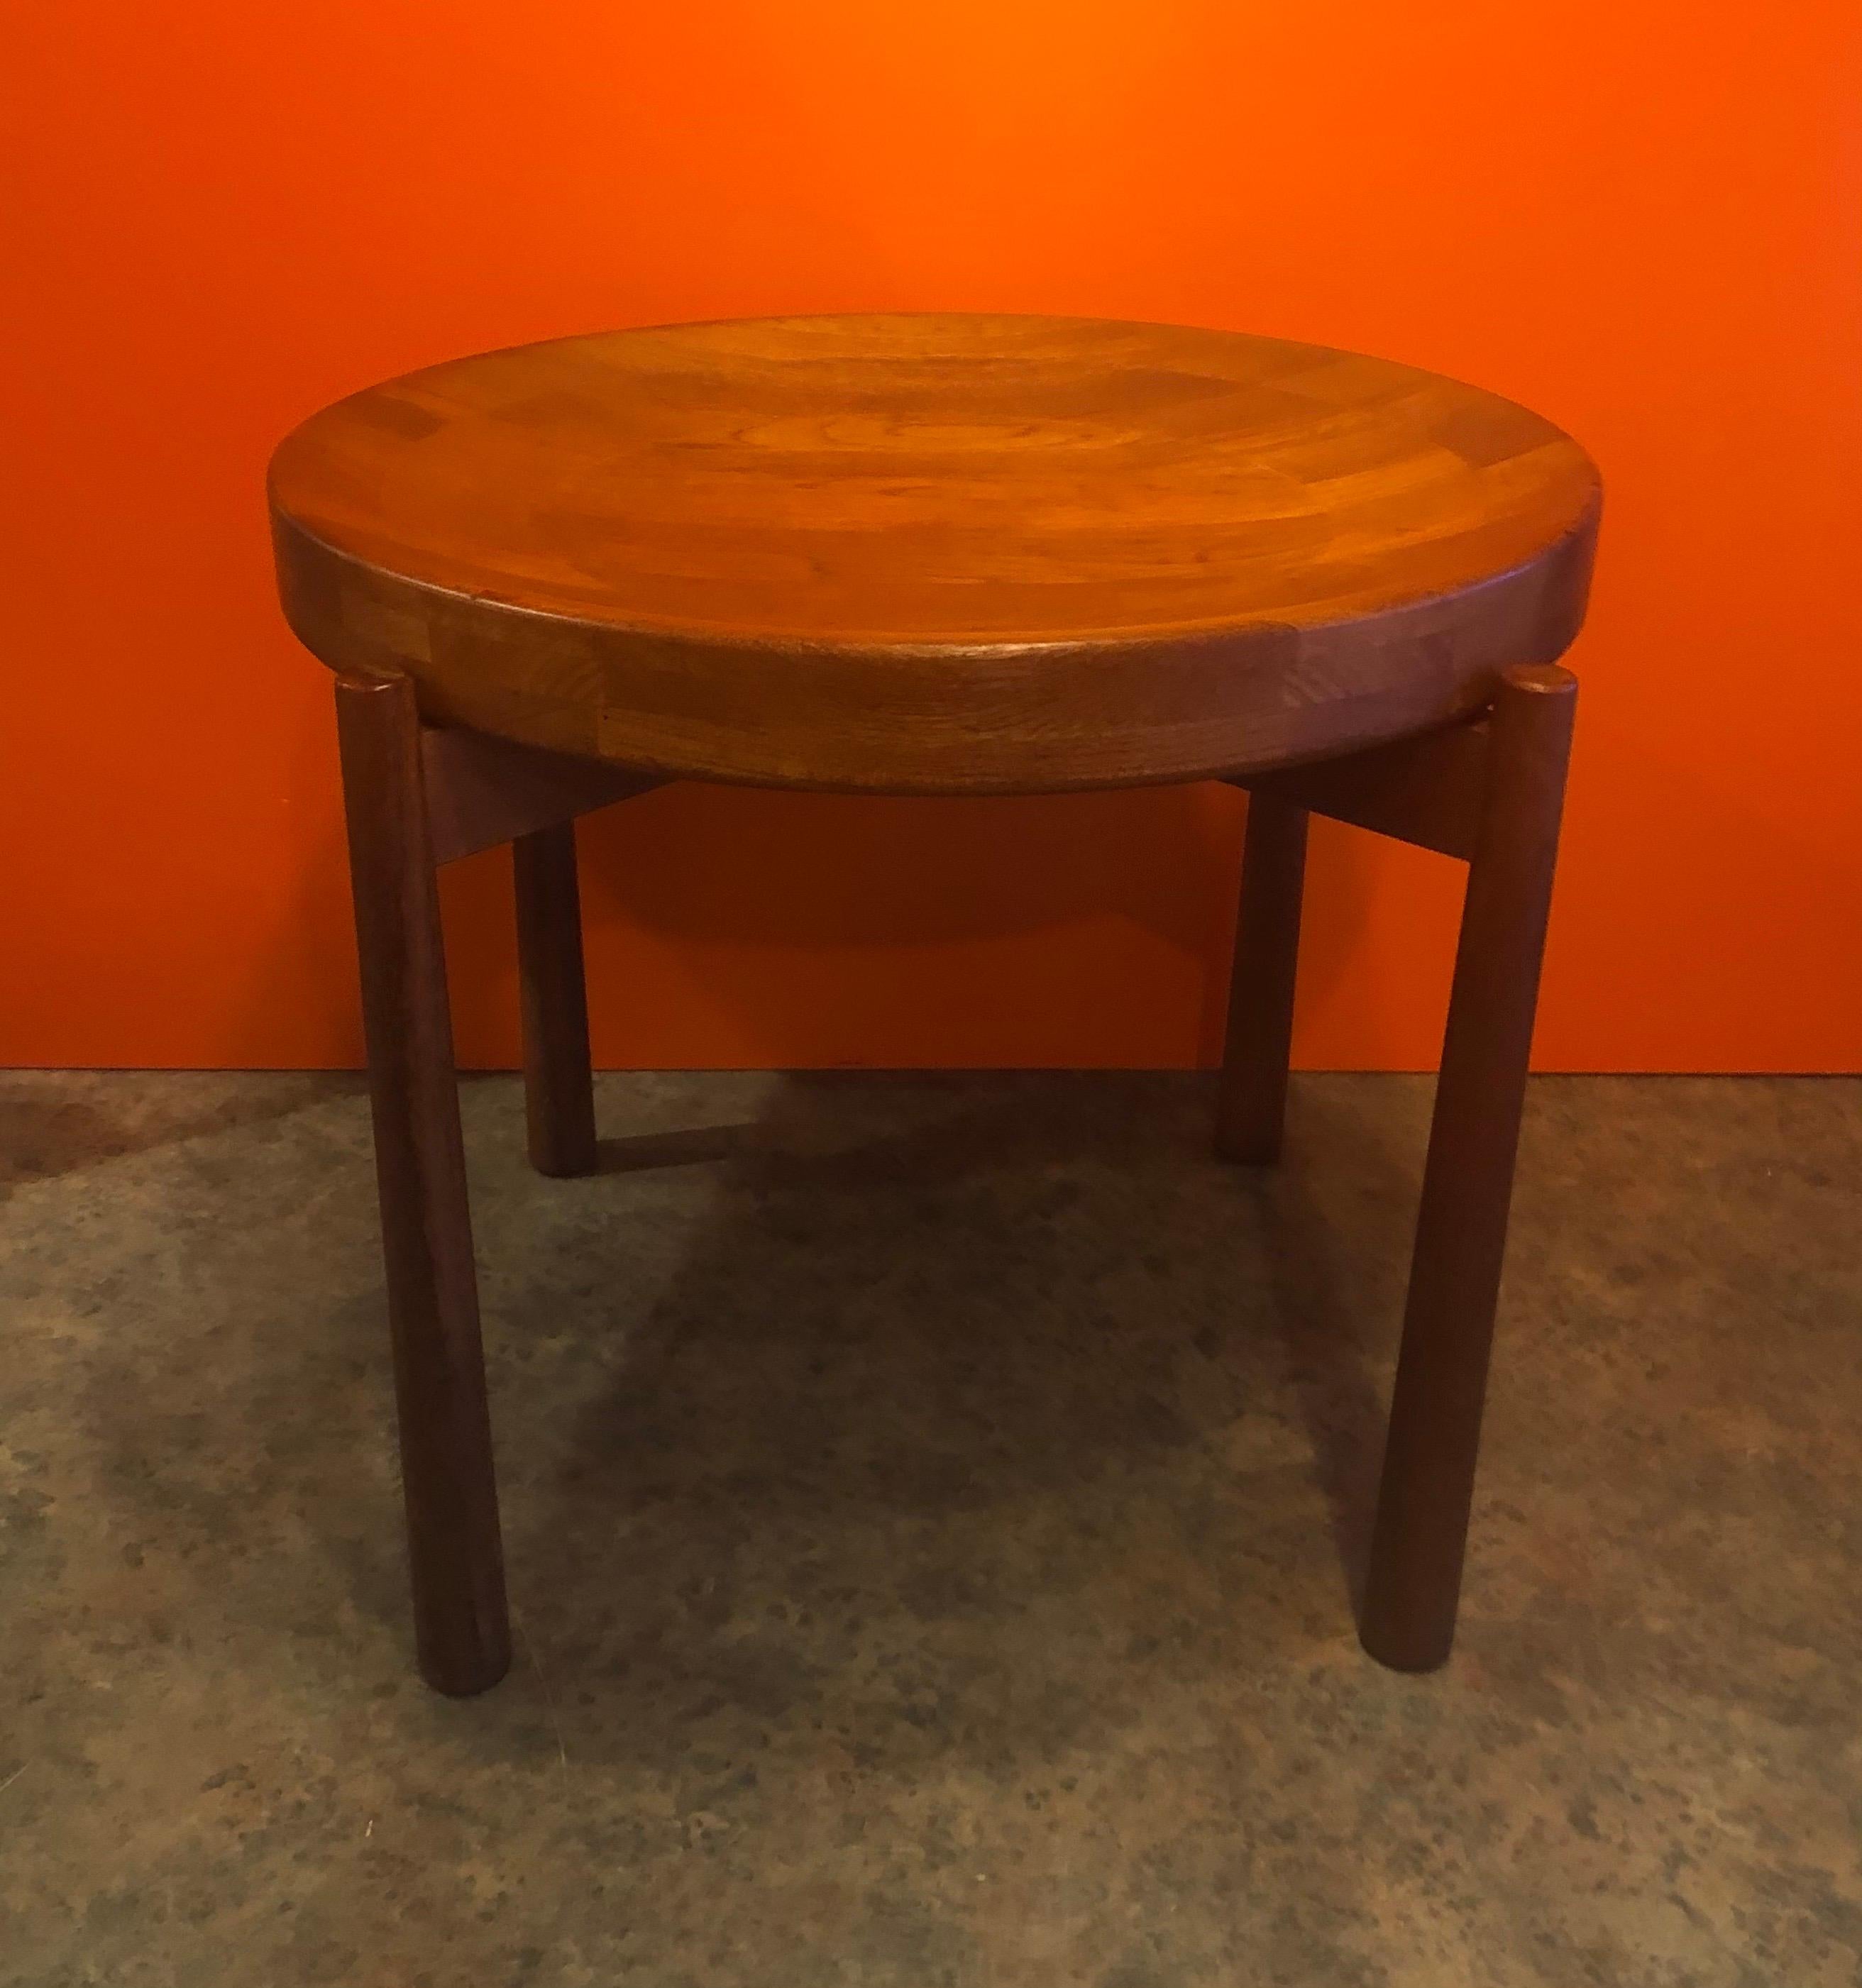 Side Table or Fruit Bowl Attributed to Jens Harald Quistgaard for DUX of Sweden In Good Condition For Sale In San Diego, CA